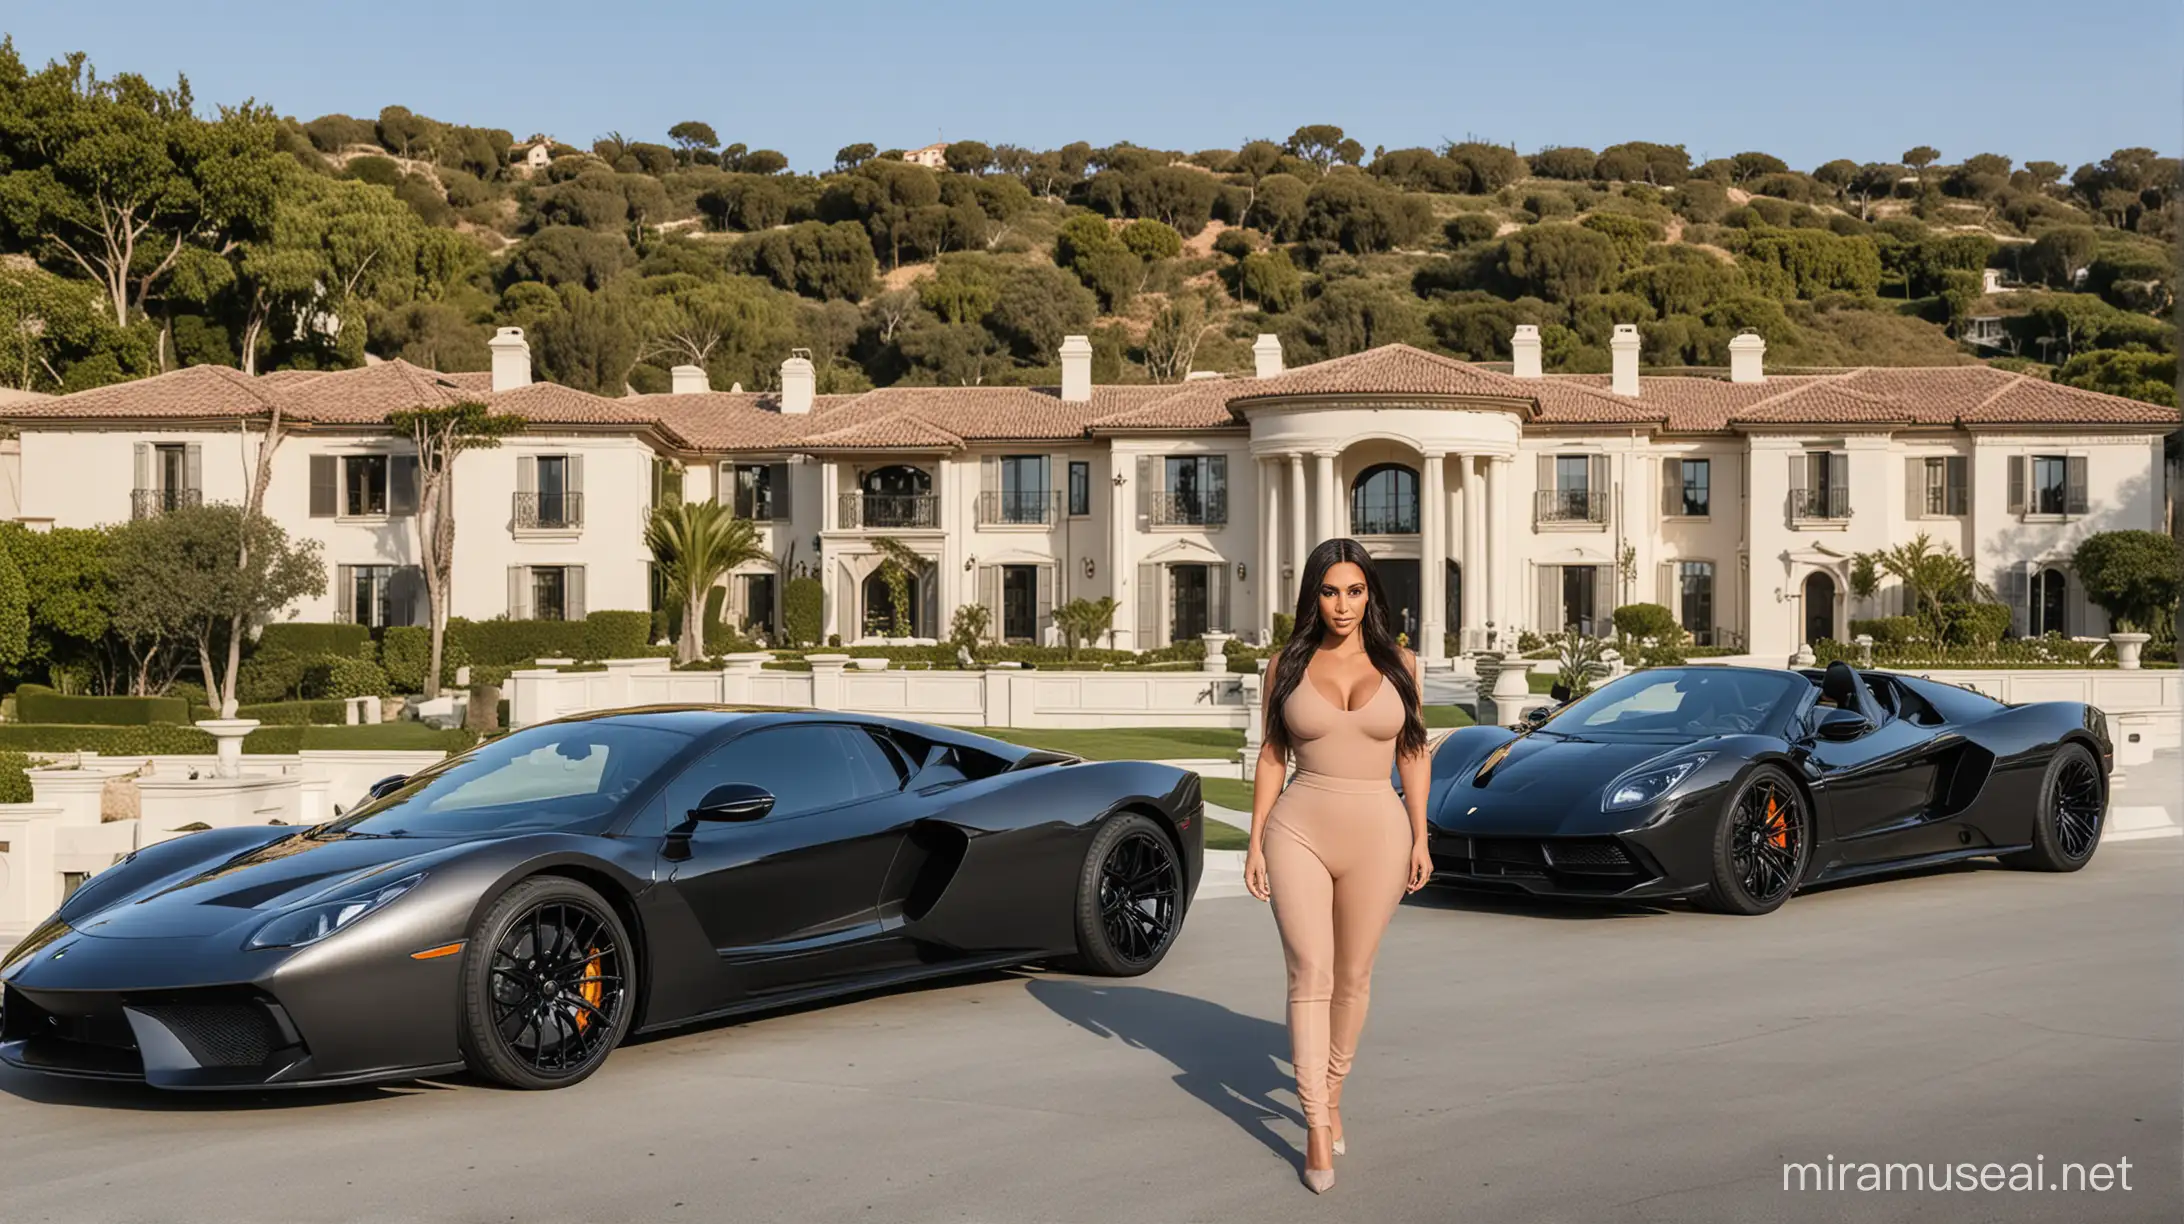 Kim Kardashian billionaire house and cars in the background